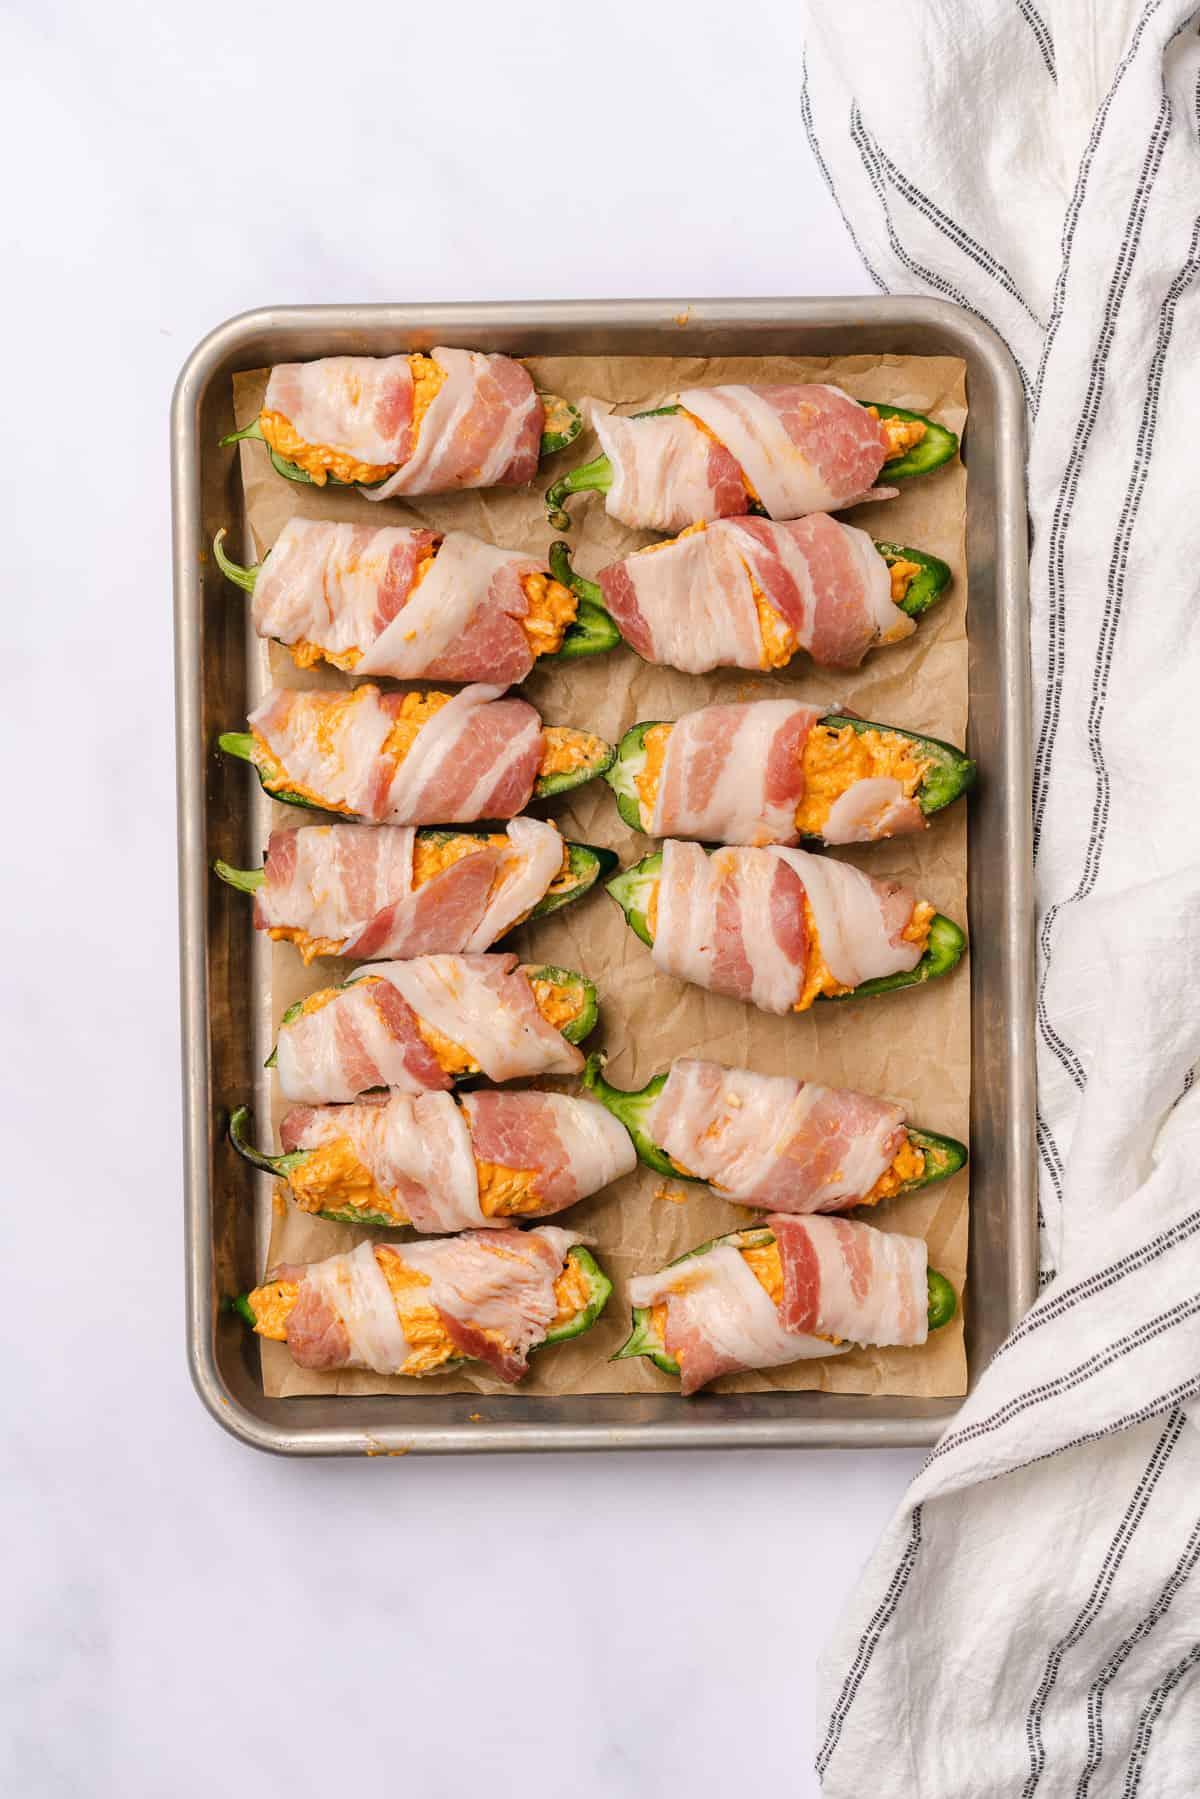 jalapeno poppers with buffalo chicken dip then wrapped with bacon